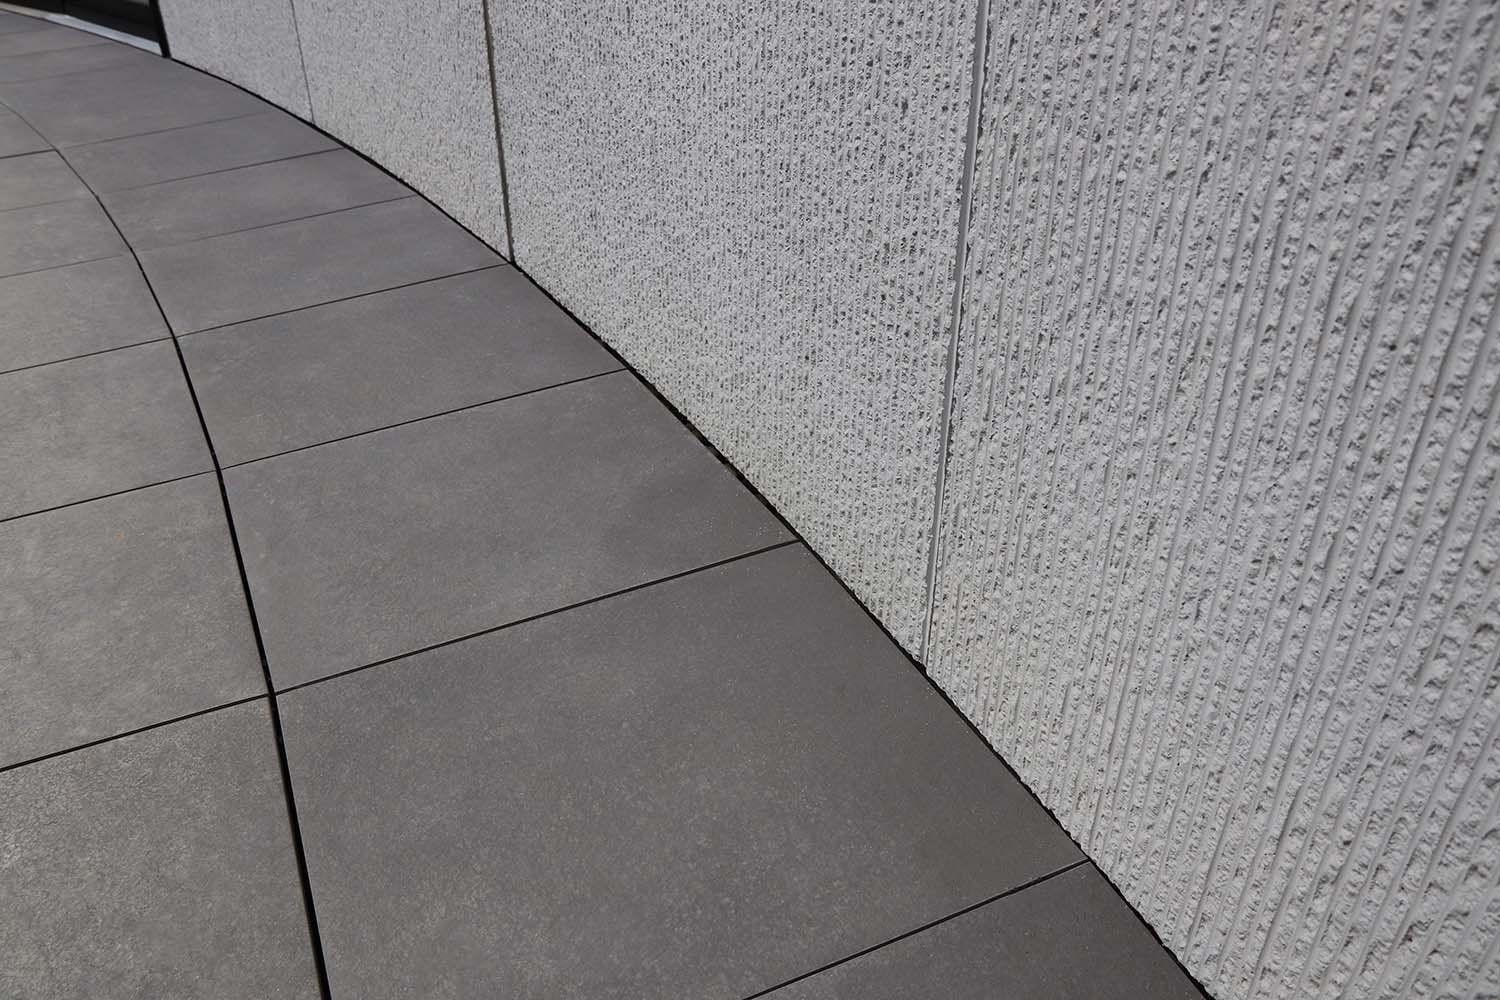 image to show paver separation without grouting